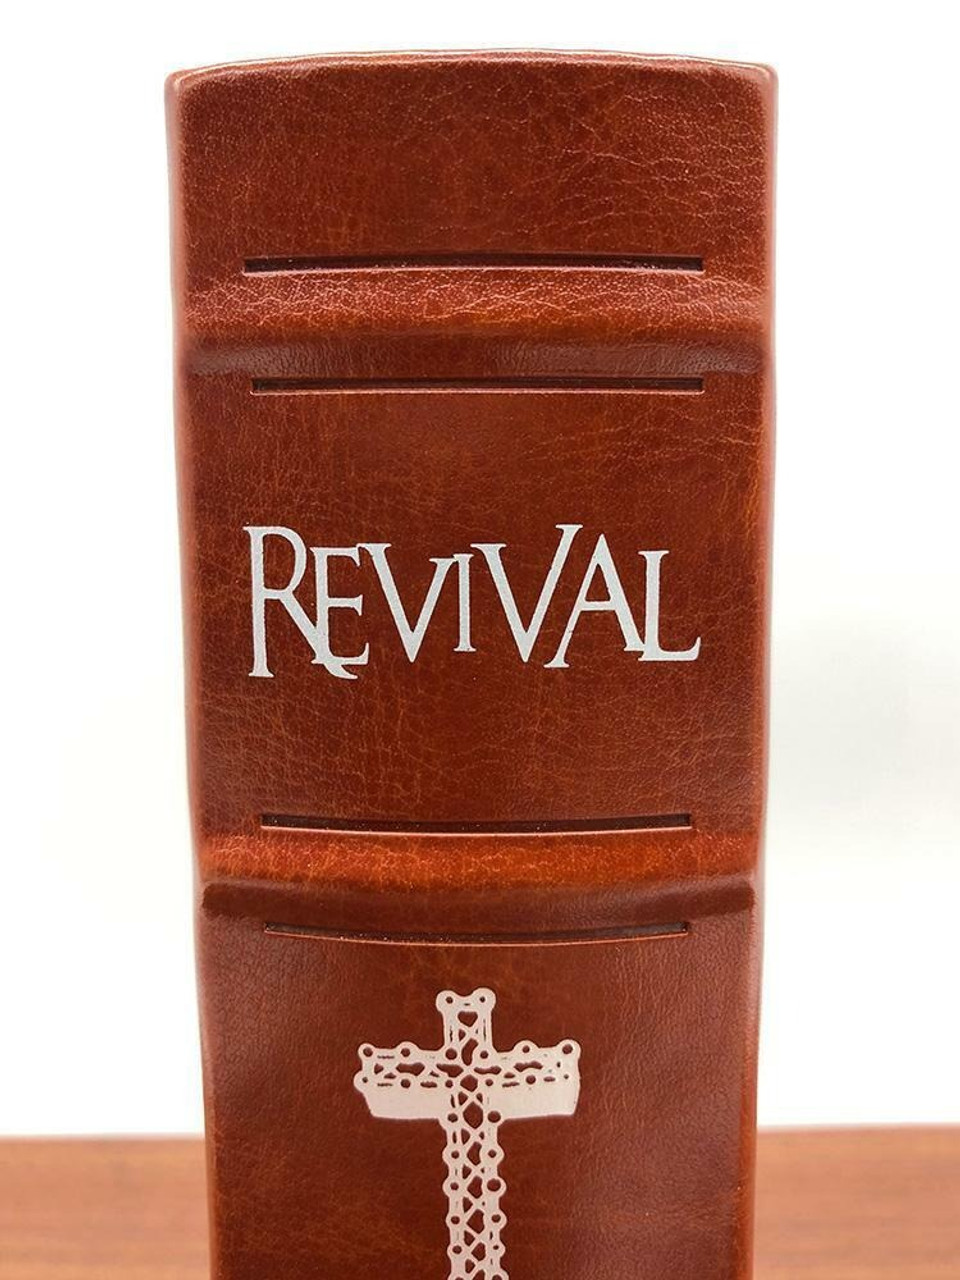 Stephen King "Revival" Ultimate Collection, Francois Vaillancourt "Charles Jacobs" Signed Limited Edition Print of 20, Signed Artist Deluxe Edition, Remarqued by Glenn Chadbourne, Artwork Portfolio